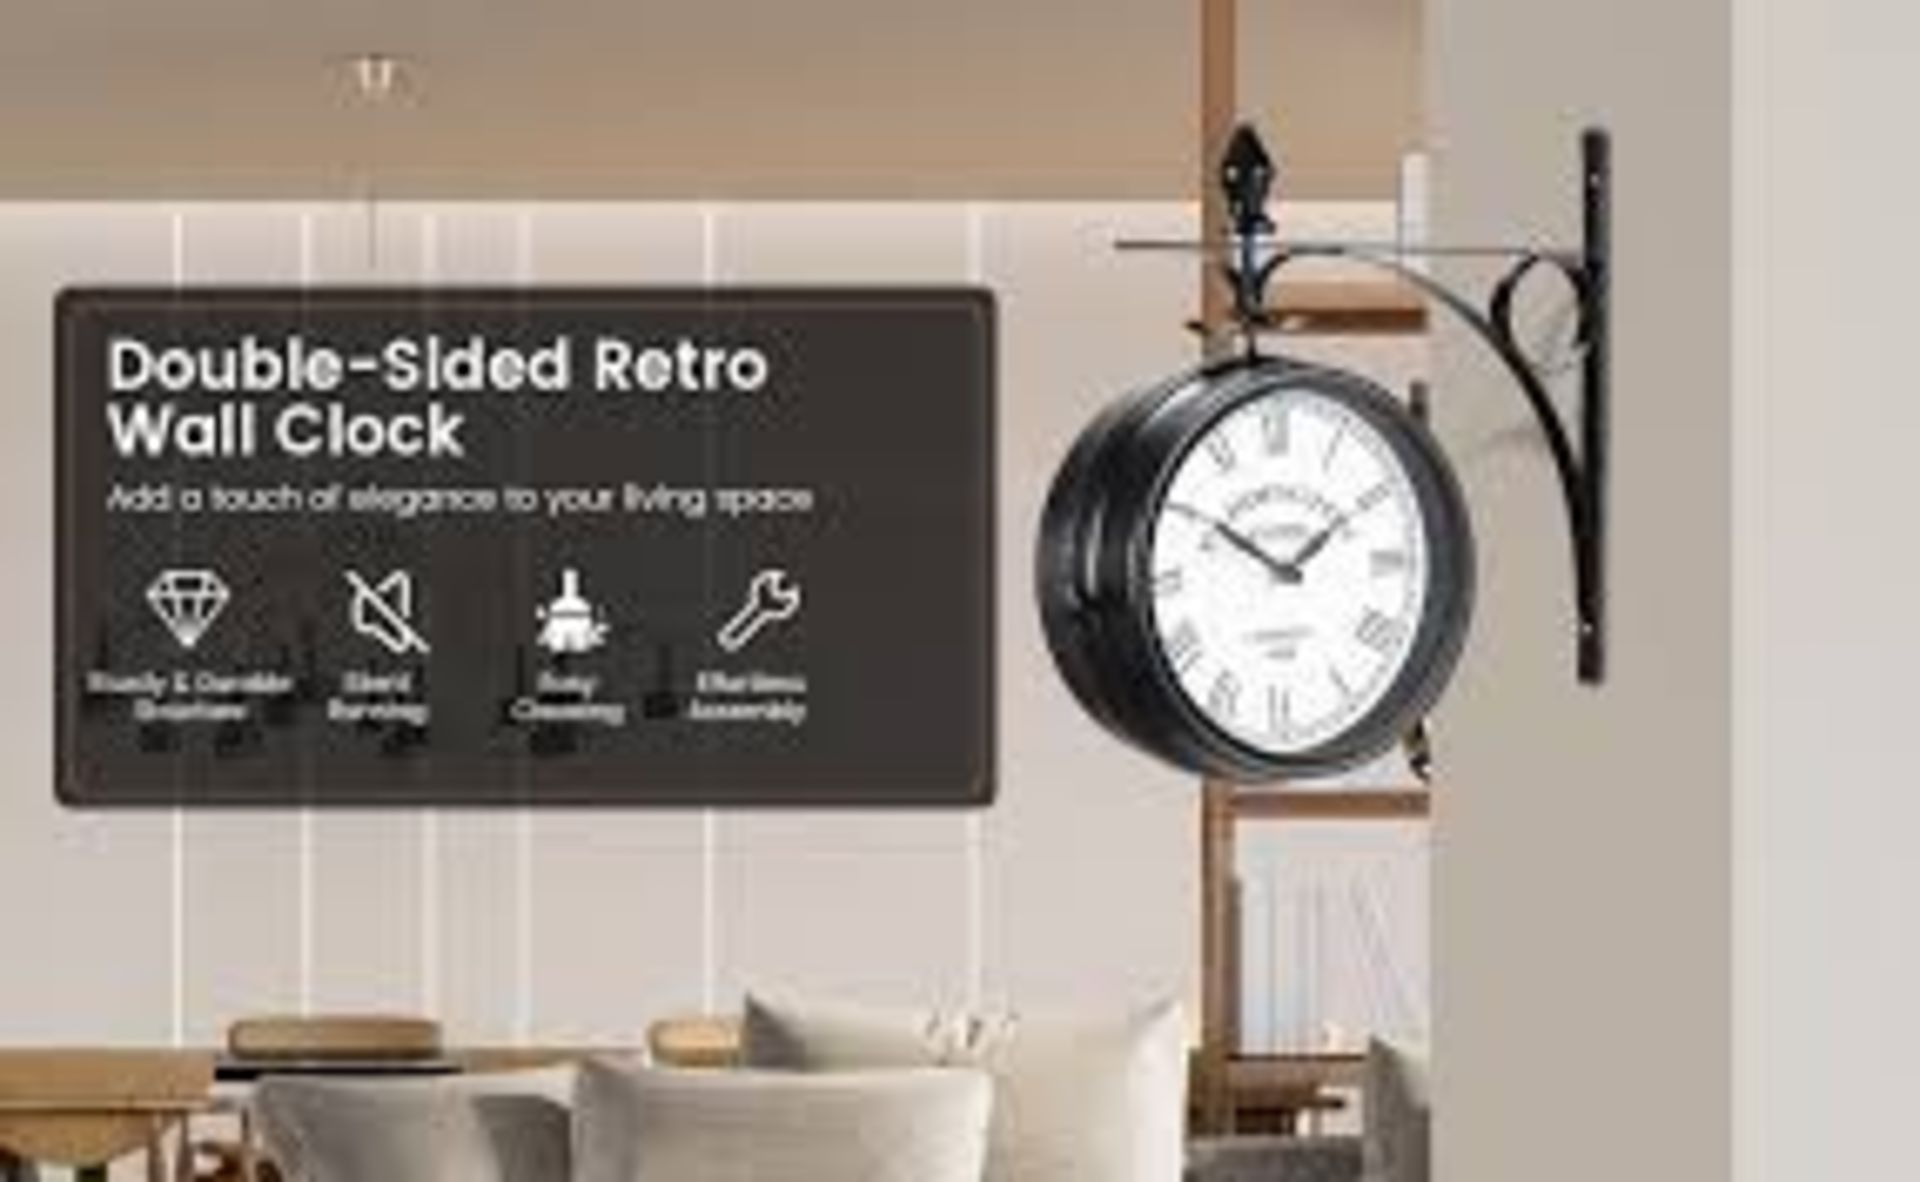 Vintage Wall-Mounted Double-Sided Wall Clock. - R14.5. This vintage double-sided clock not only